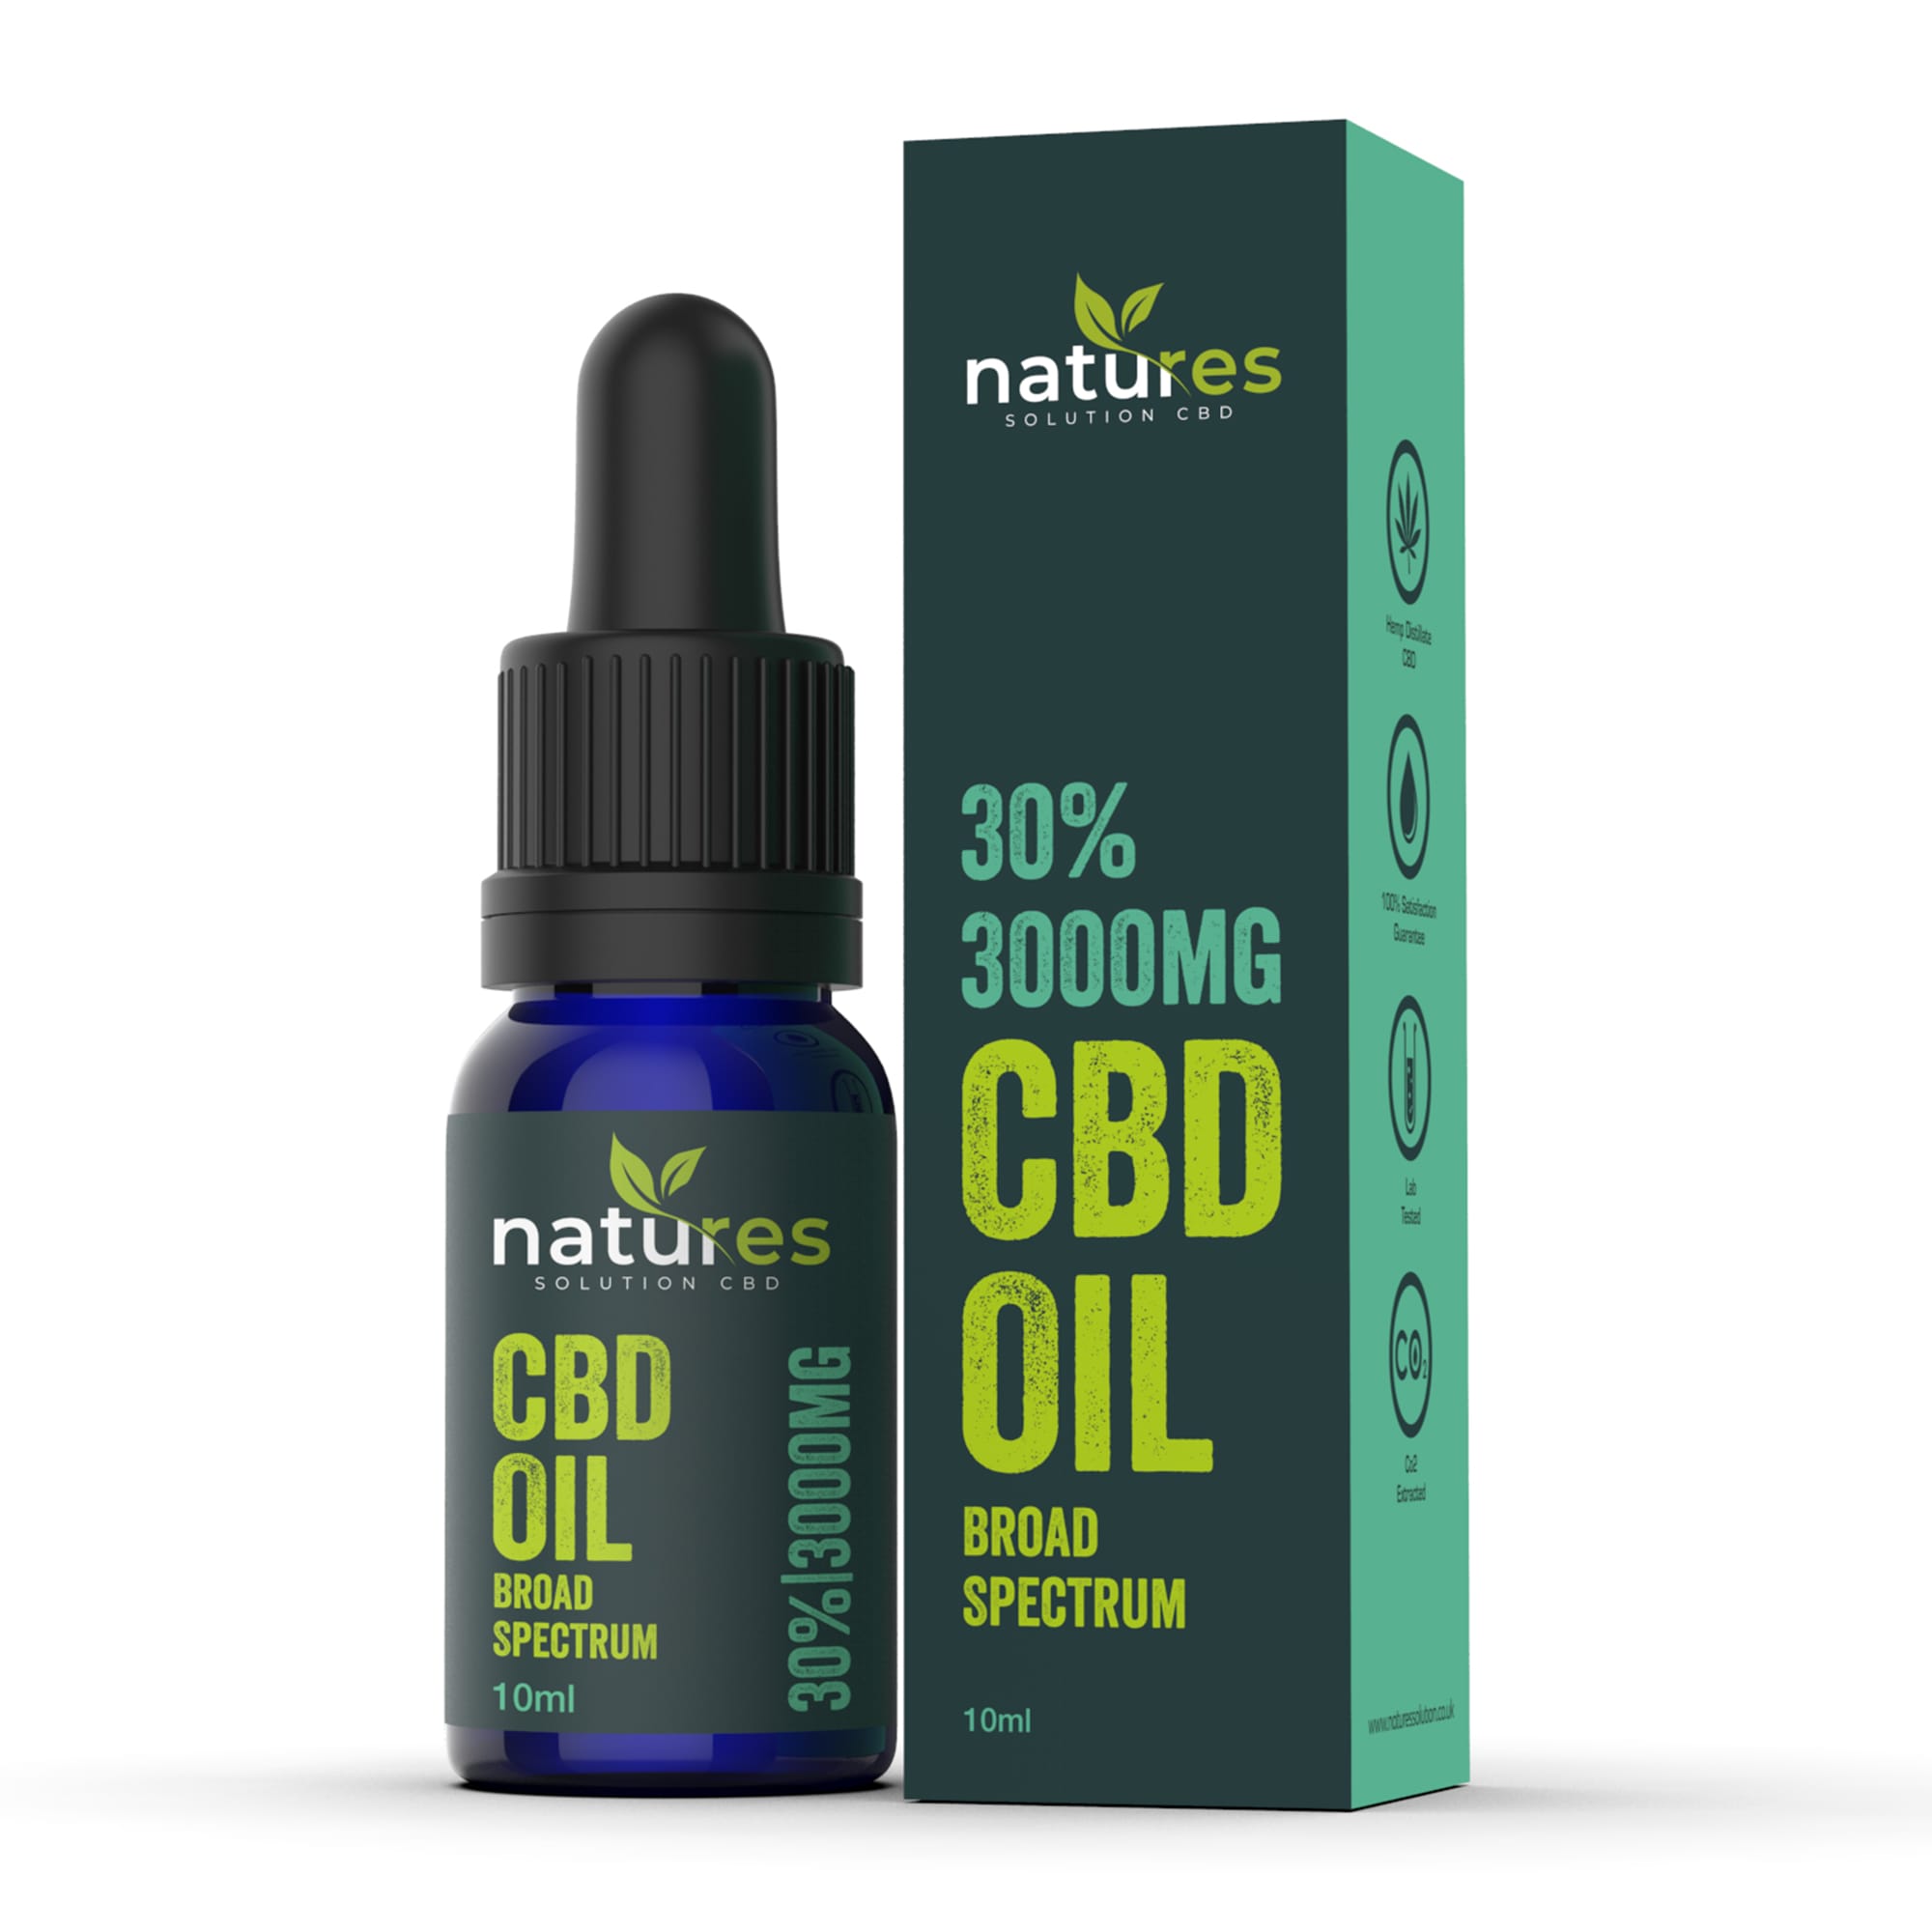 Natures Solution: A bottle of Natures Solution CBD in a blue bottle